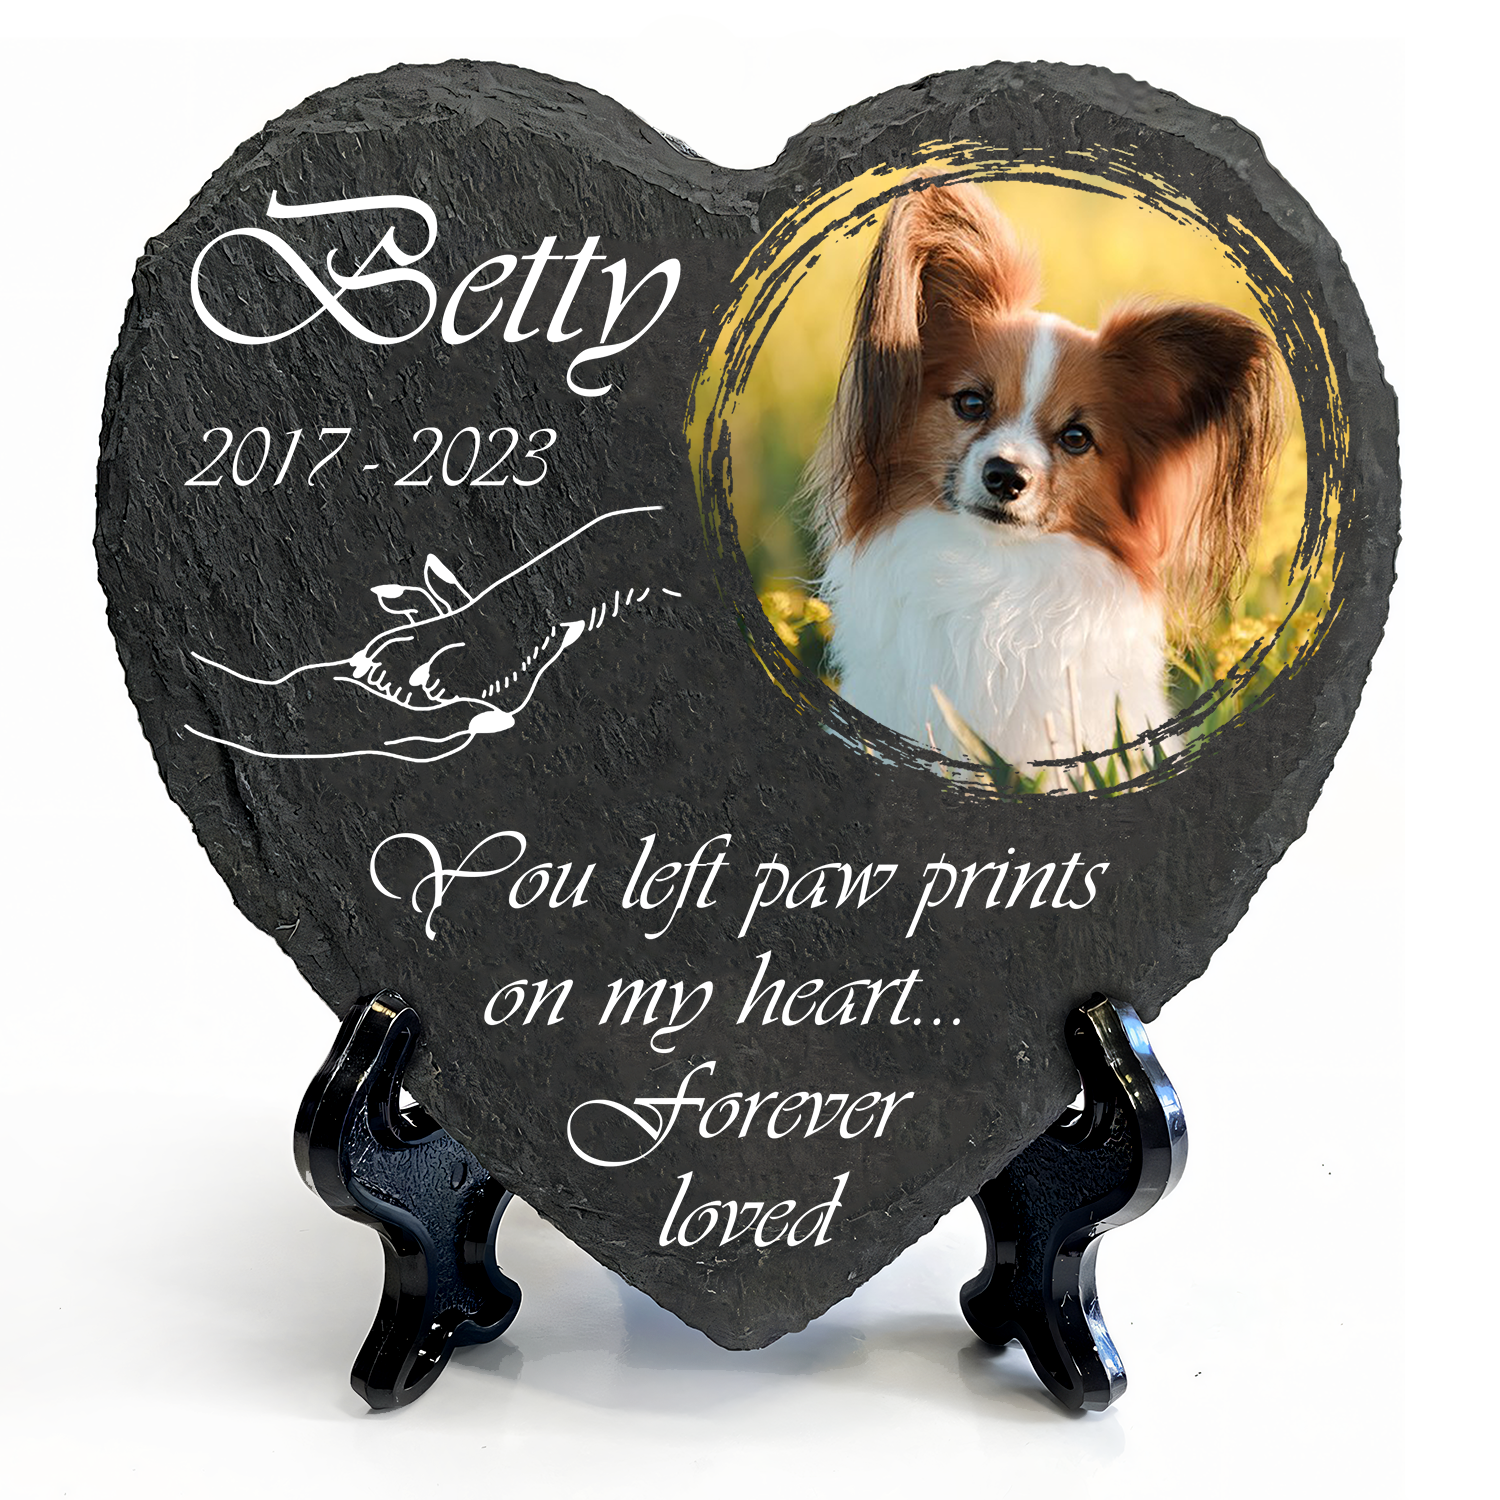 Holding Hand Dog Photo You Left Paw Prints On My Heart Custom Dog Memorial Stone, Pet Memorial Gifts - Personalized Custom Memorial Tombstone